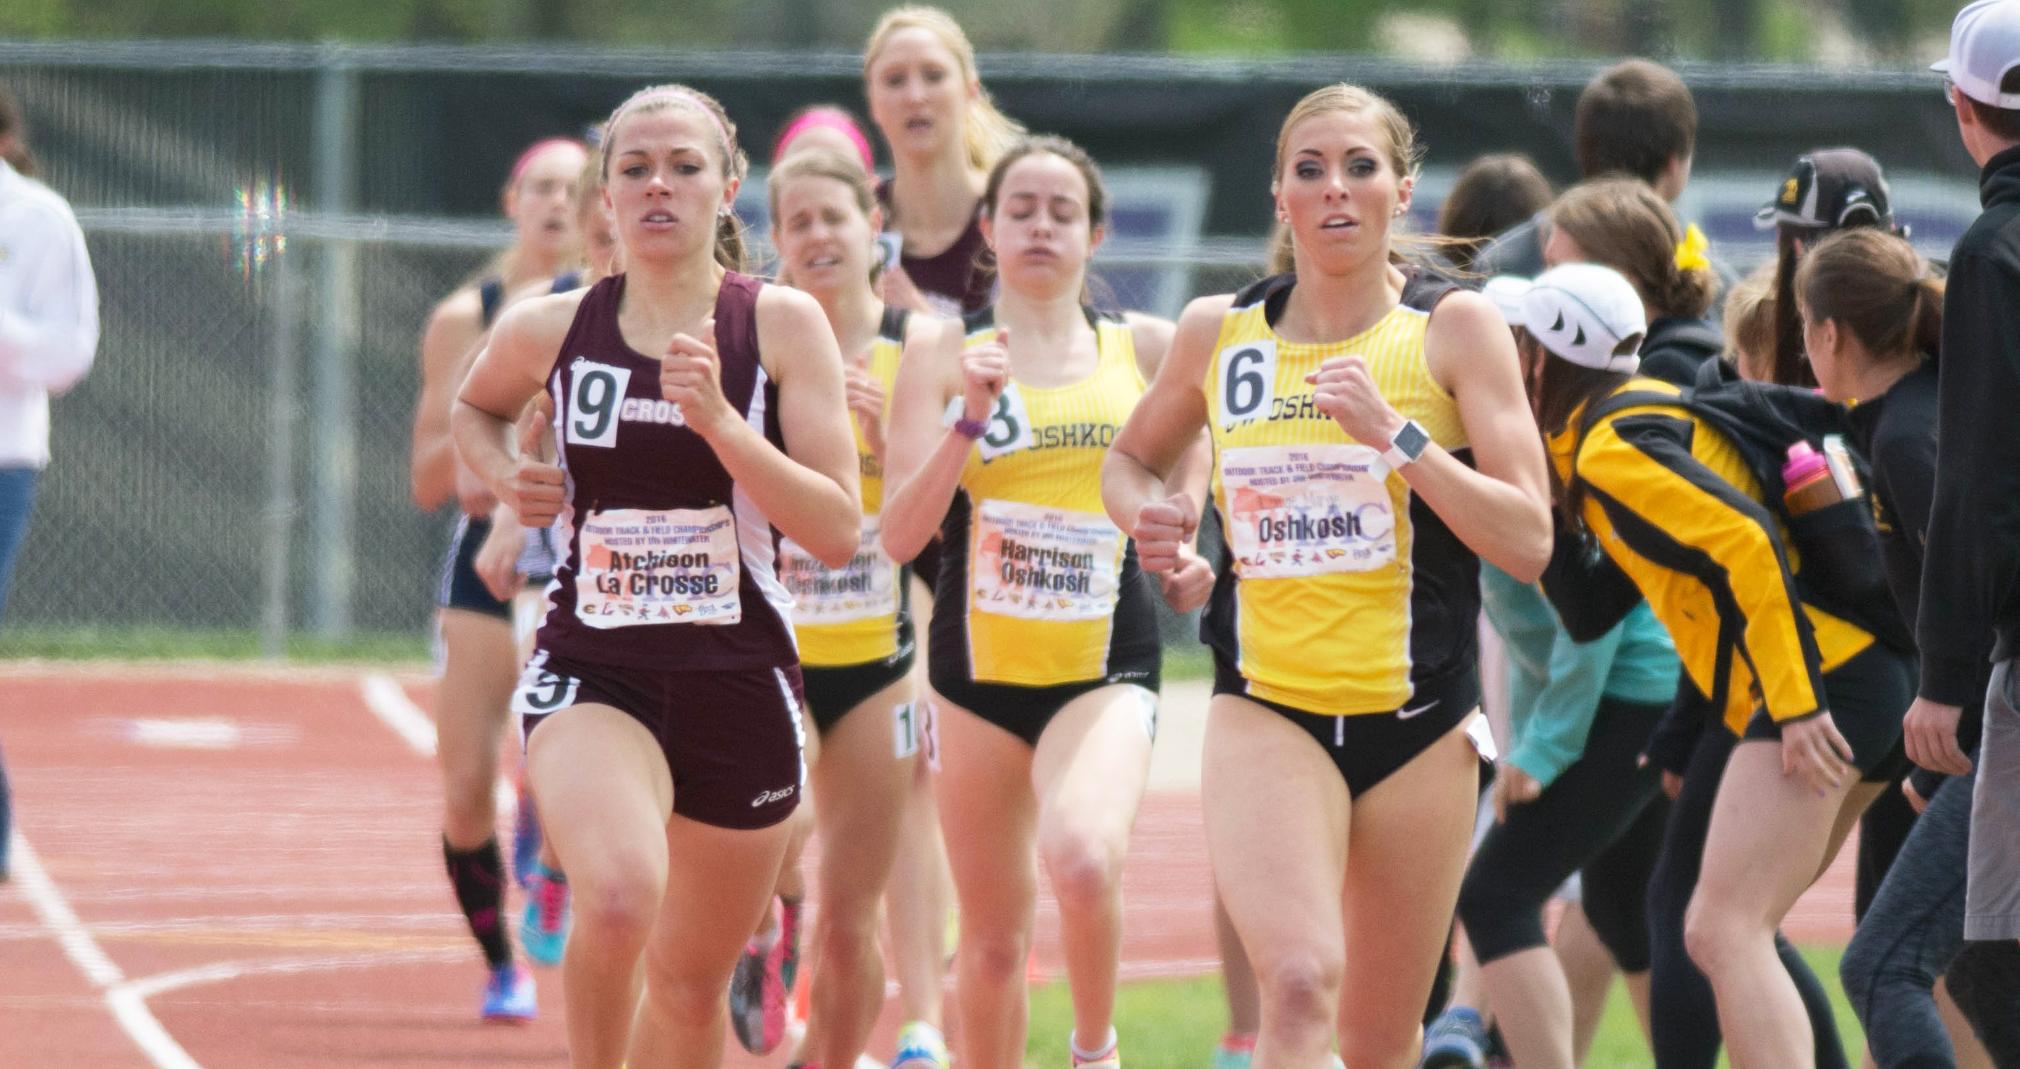 Kylee Verhasselt repeated as 800-meter run champion and won the 1,500-meter run at this year's WIAC Outdoor Championship.